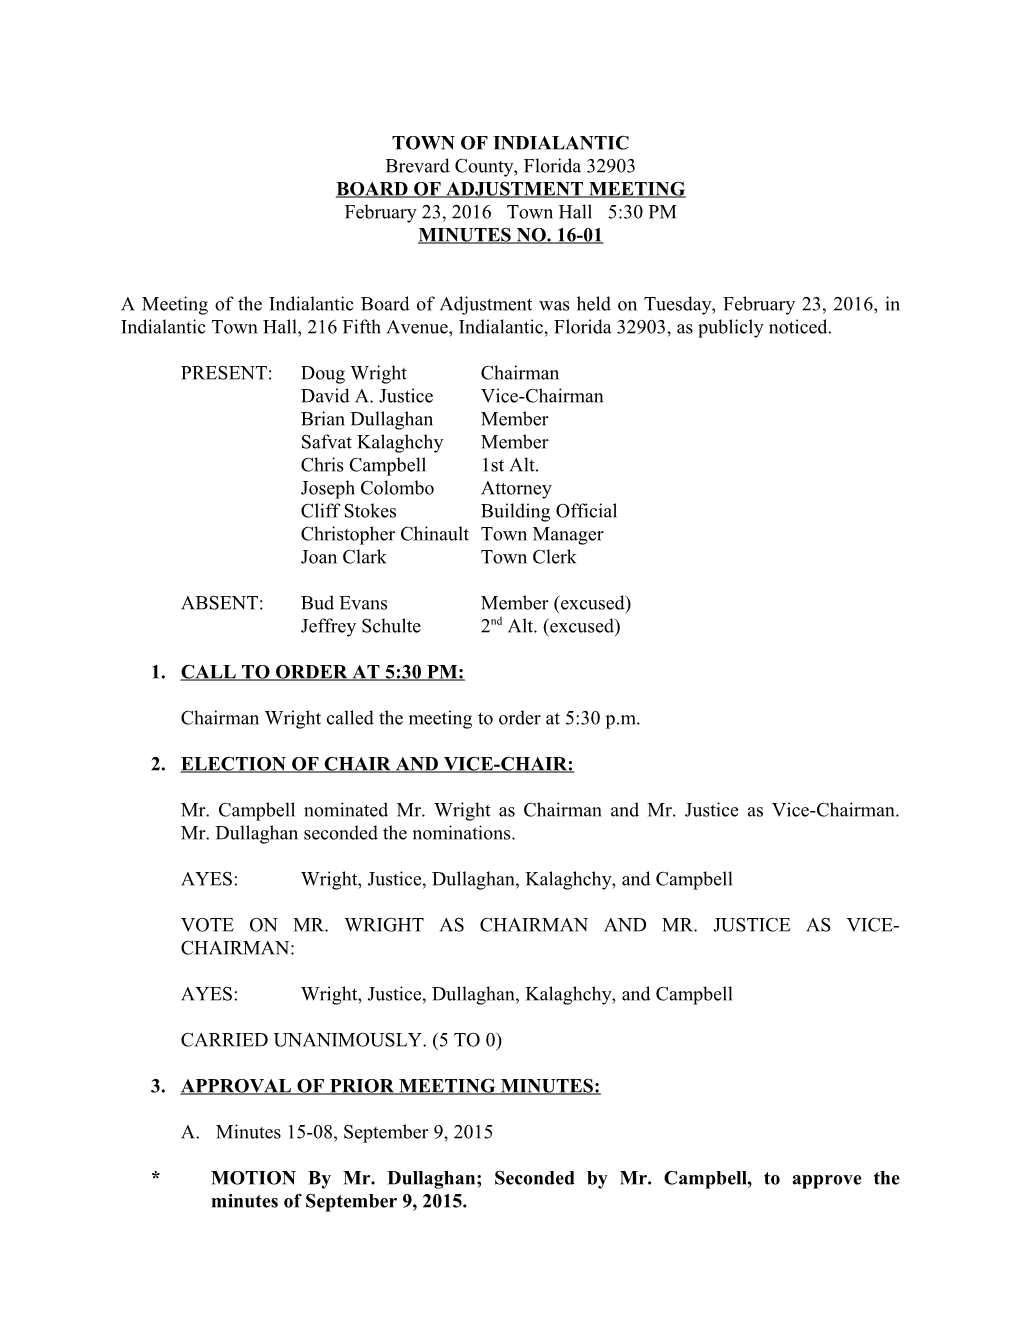 Zoning and Planning Board Minutes February 23, 2016